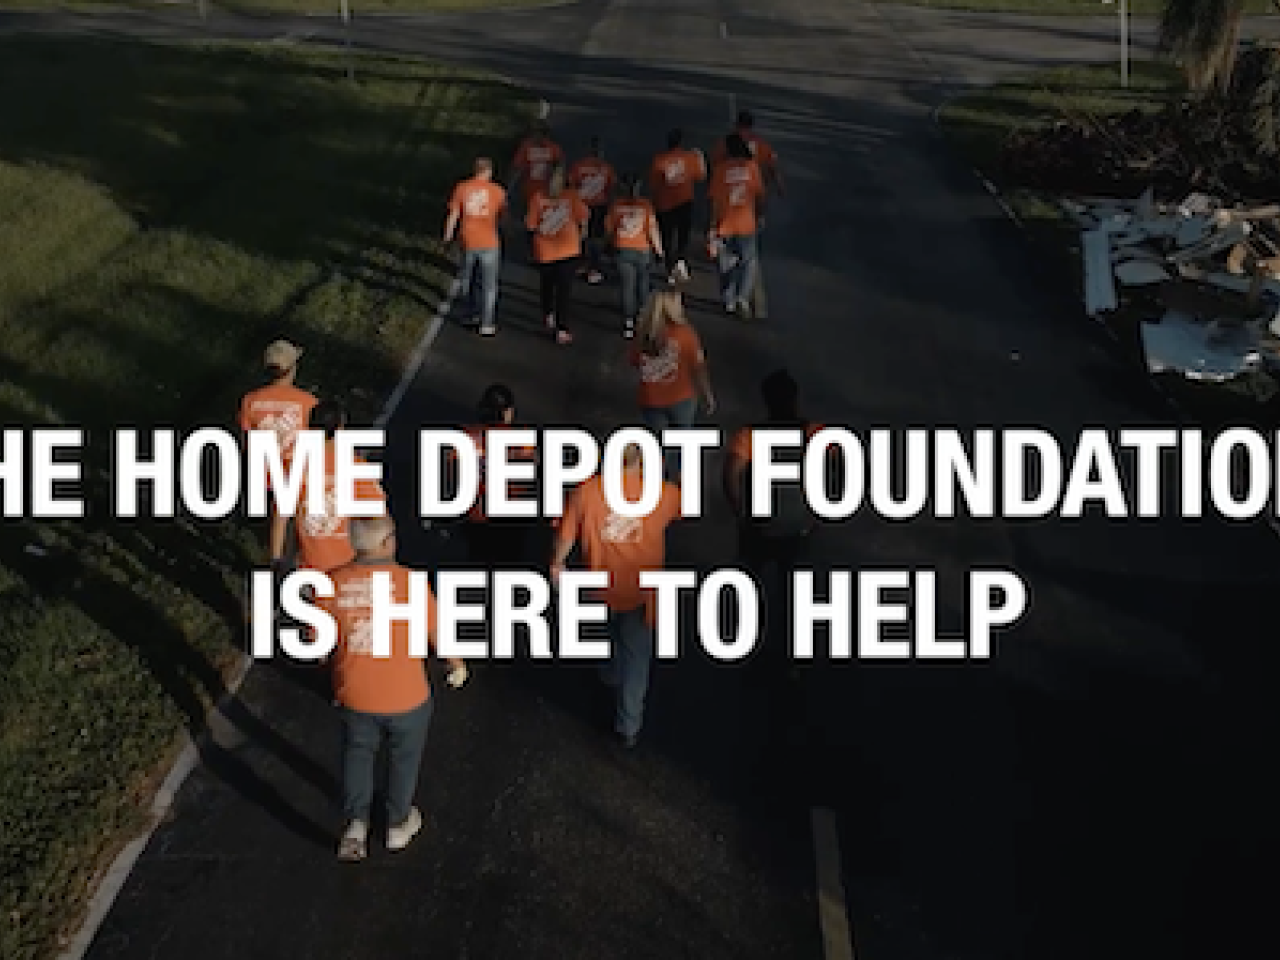 The Home Depot Foundation is here to help!